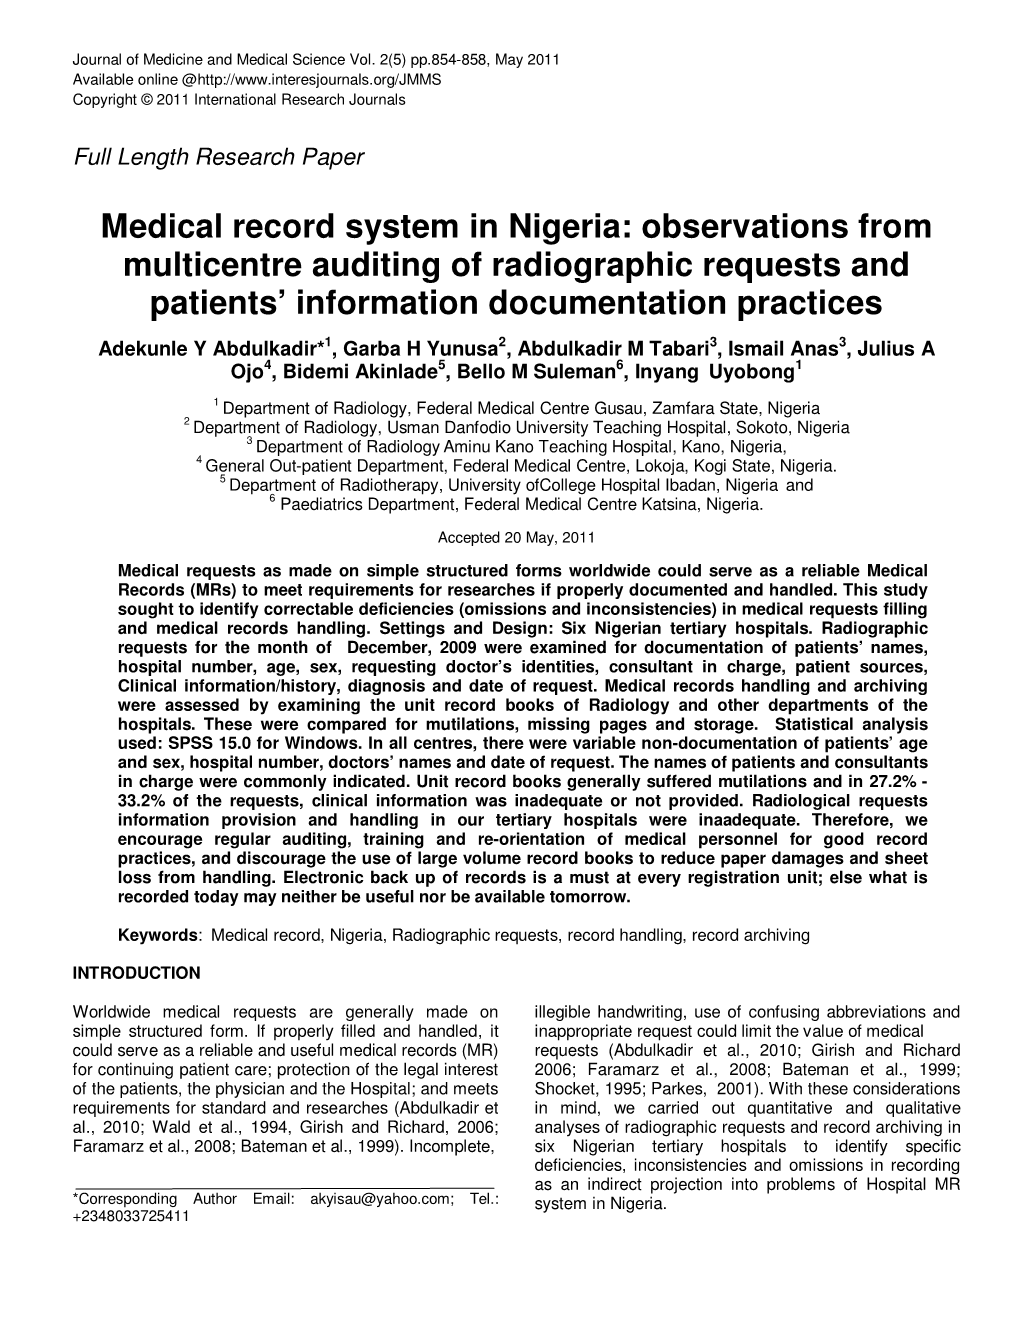 Medical Record System in Nigeria: Observations from Multicentre Auditing of Radiographic Requests and Patients' Information Do